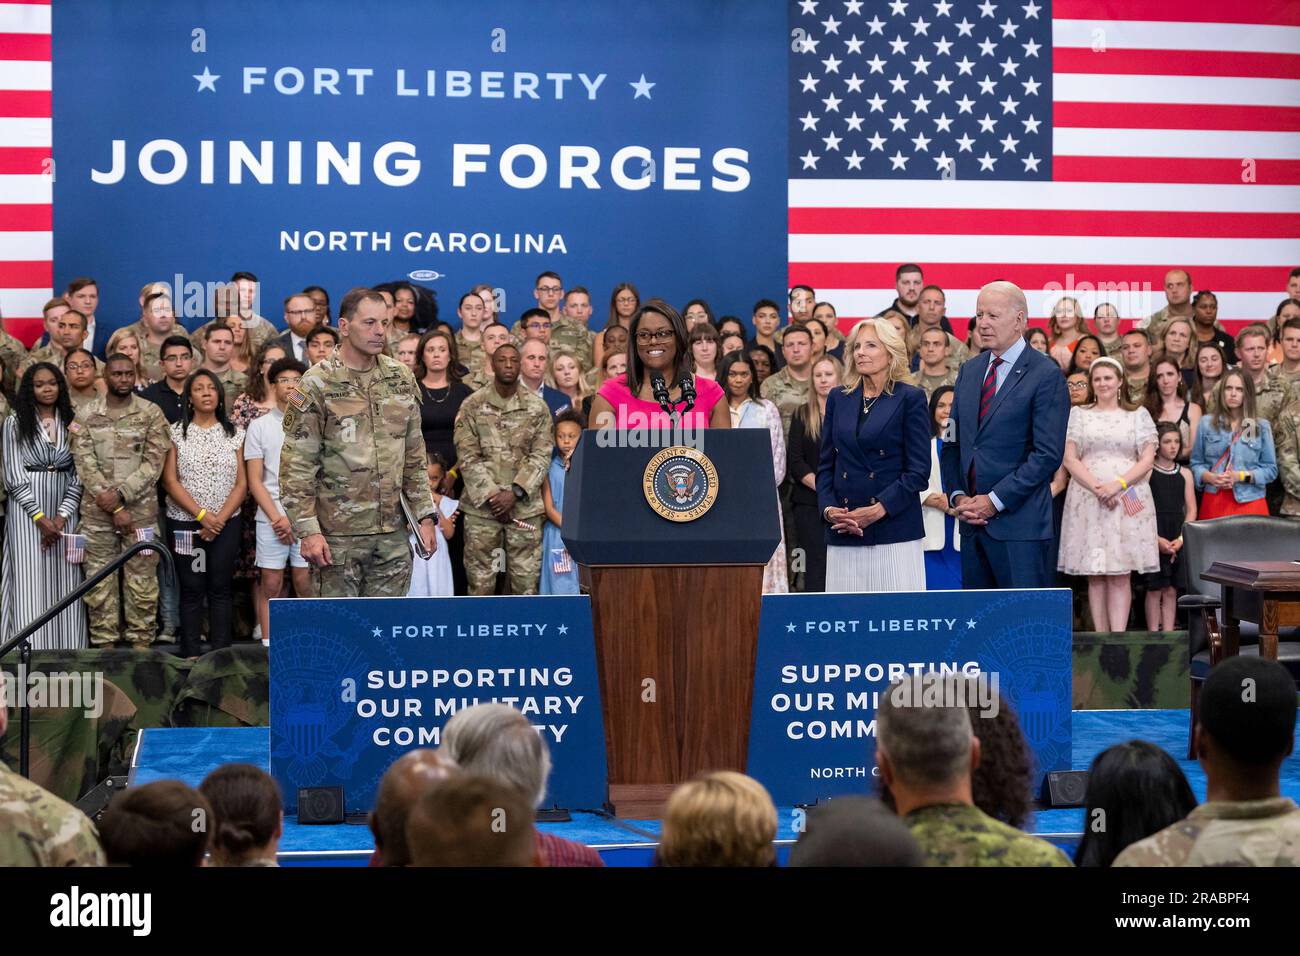 Fayetteville, United States of America. 09 June, 2023. Military spouse Tiffany Zoeller introduces U.S President Joe Biden for an Executive Order signing ceremony promoting the Joining Forces program for military families at Fort Liberty, June 9, 2023, in Fayetteville, North Carolina. Stock Photo